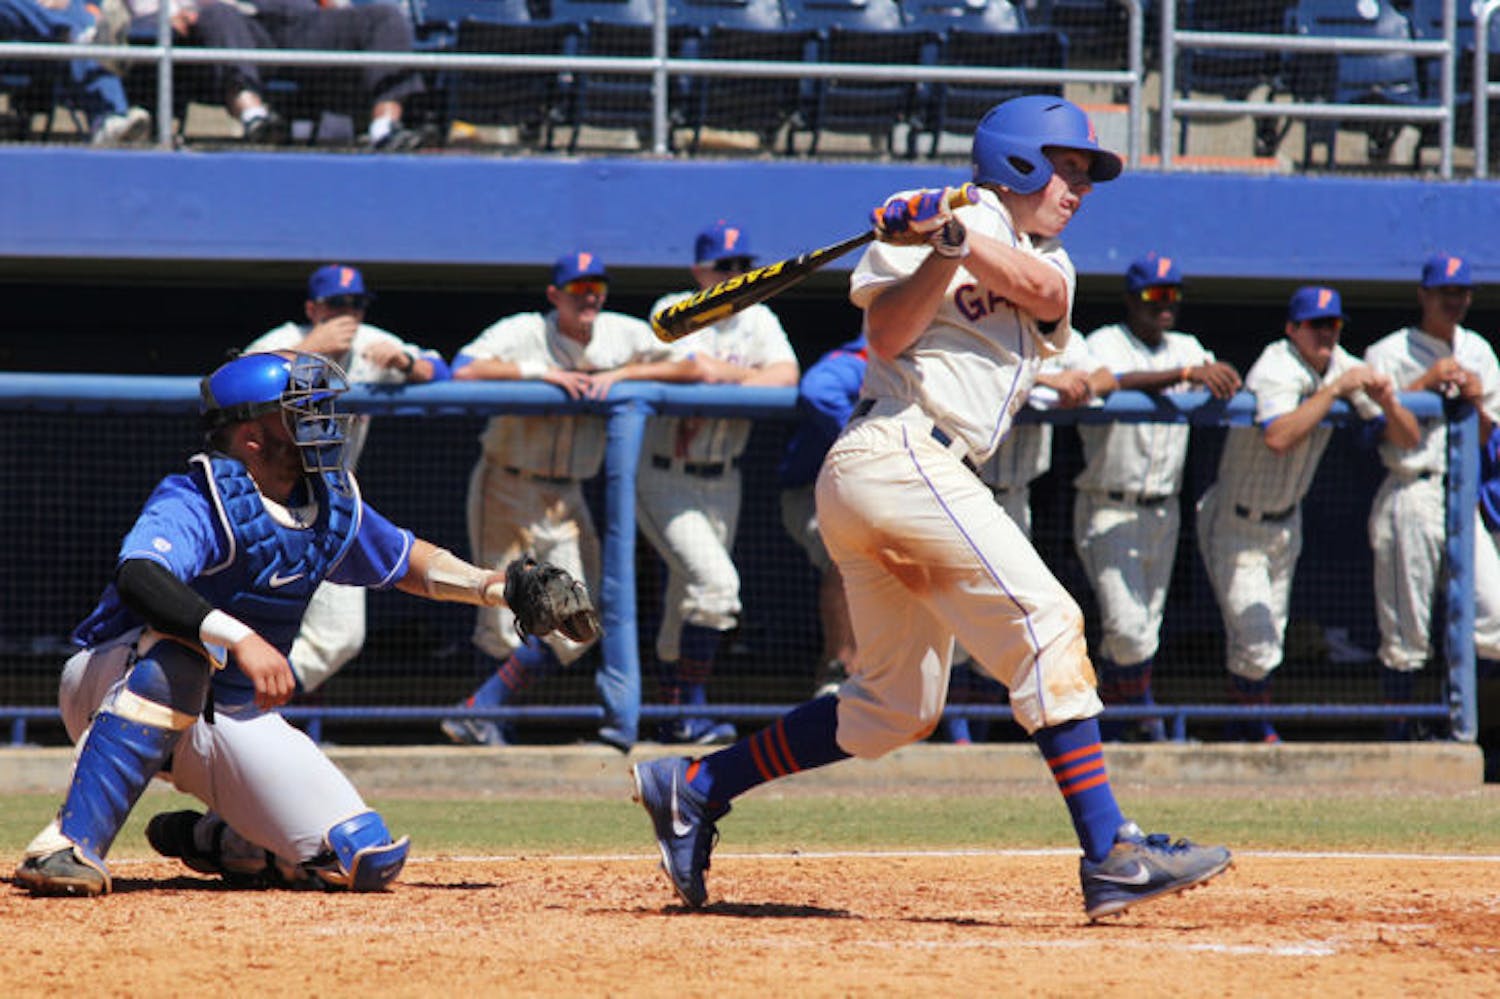 Sophomore right fielder Connor Mitchell (13) swings during Florida’s 11-5 loss to Kentucky on Saturday at McKethan Stadium. Mitchell went 3 for 8 in the Gators' series against the Wildcats.